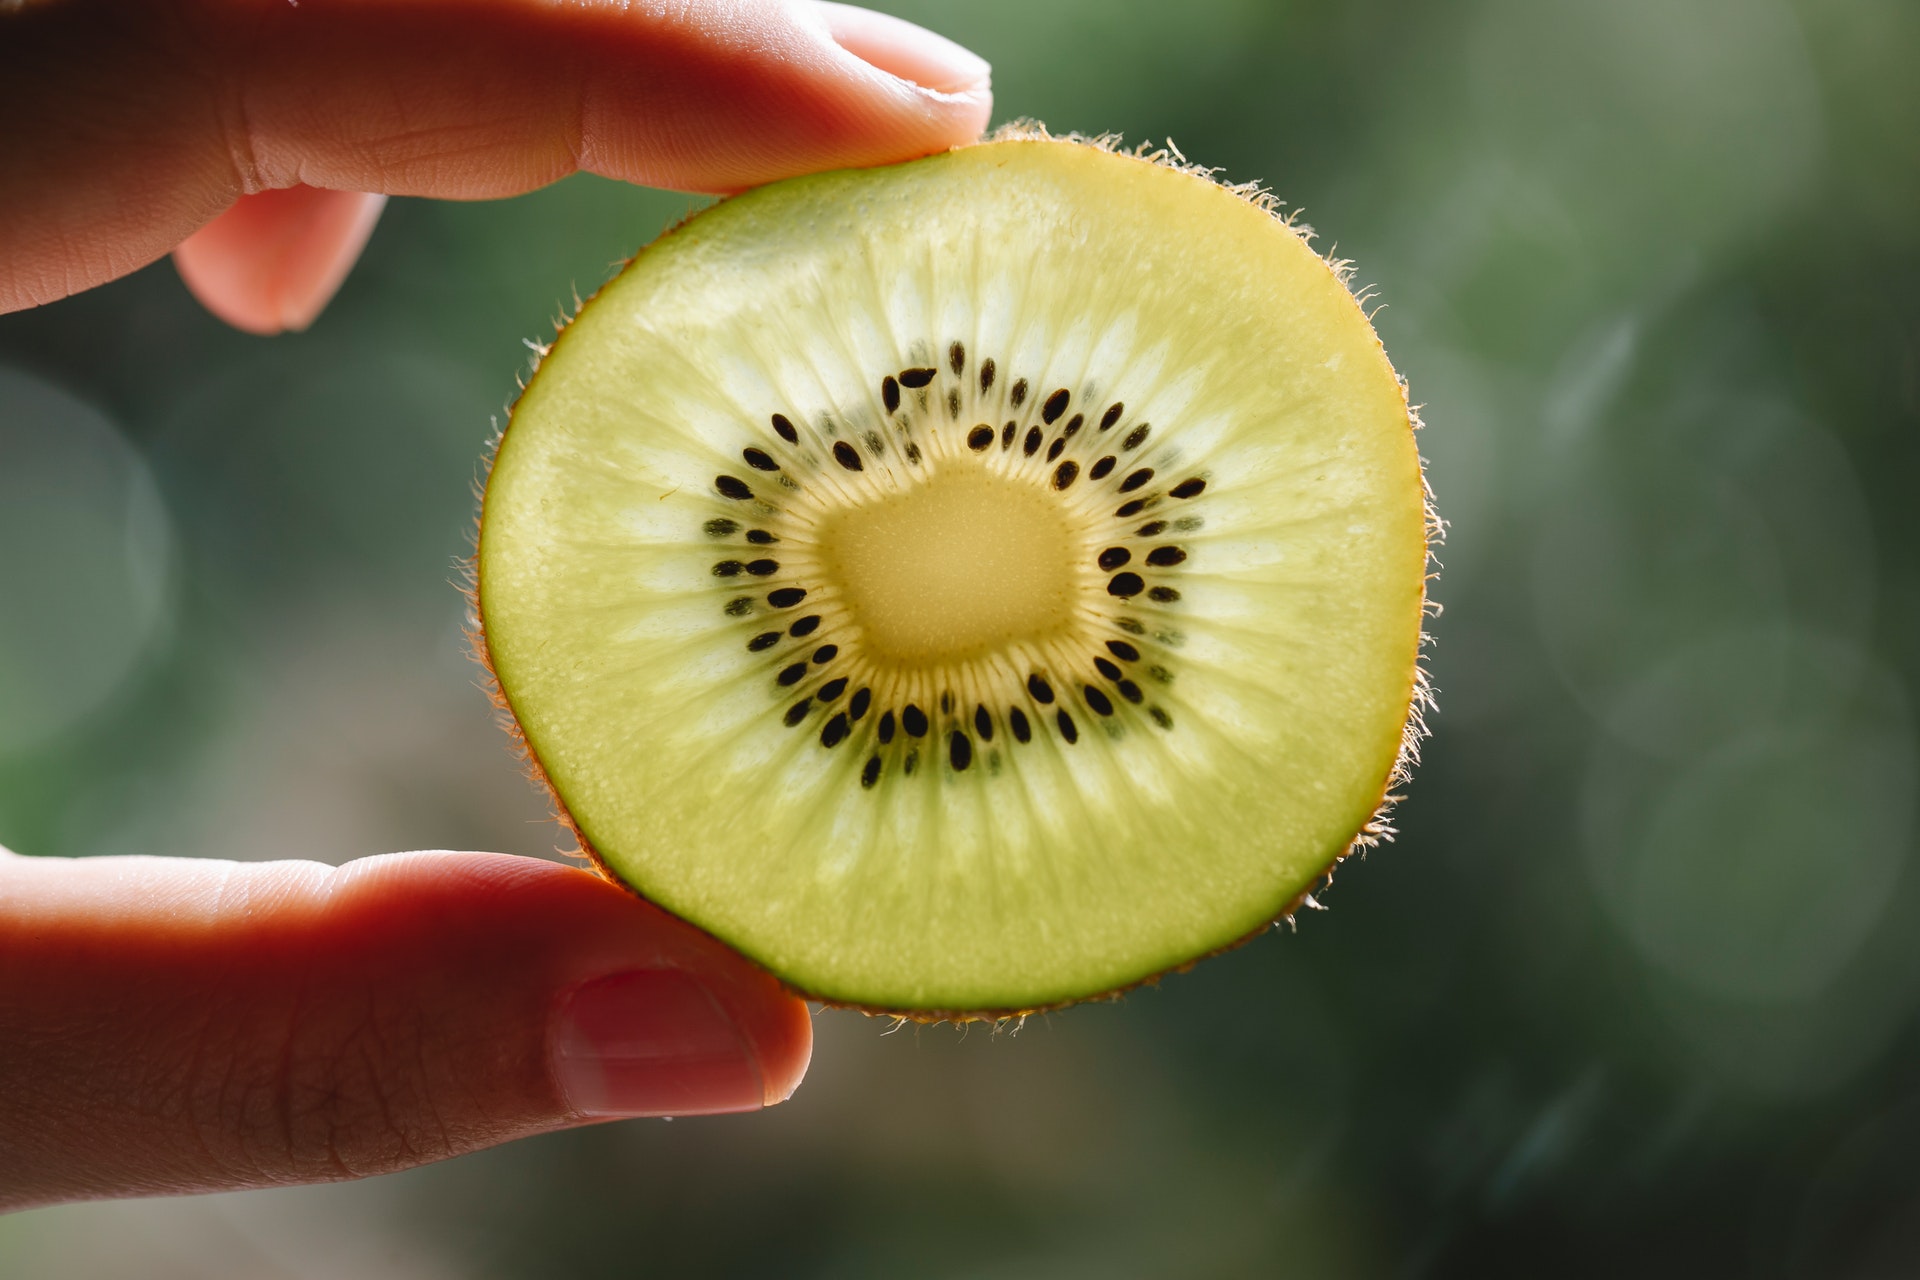 Close up photo of a kiwi between someones fingers. Eating kiwi can improve sleep quality